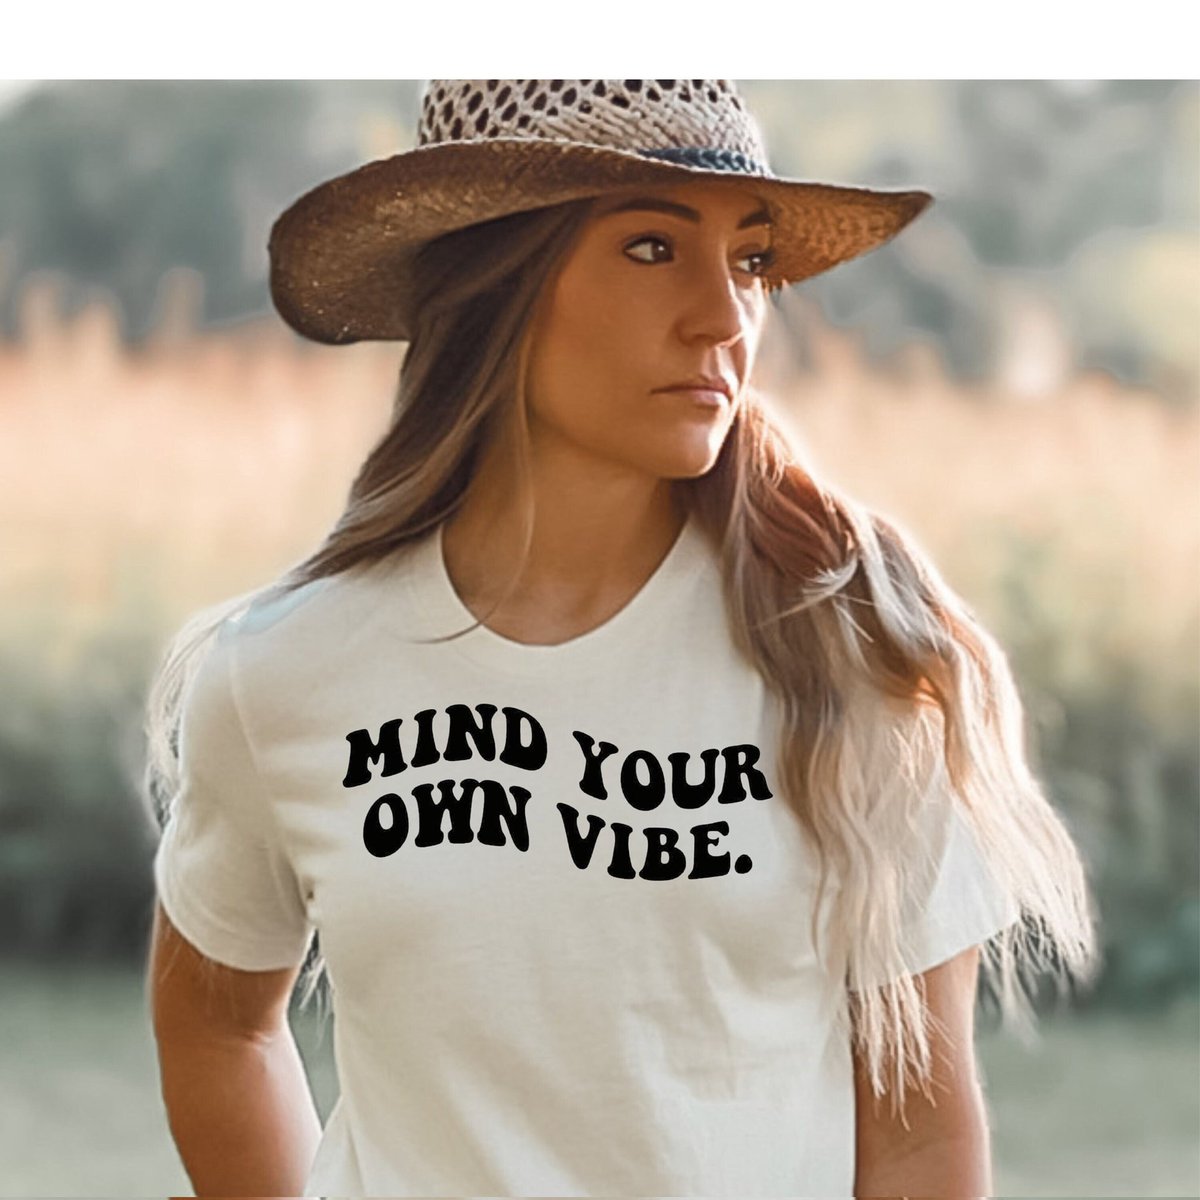 #etsy shop: Mind your own vibe - cute shirt, cute tee, teacher shirt, mother shirt, wife shirt, gifts for her, gifts for him, mothers day, mom life #girlpower #momshirt #teachershirt #momgift #teachergift #mentalhealth #vintage #90stee #allgoodvibes etsy.me/3KvS07Y